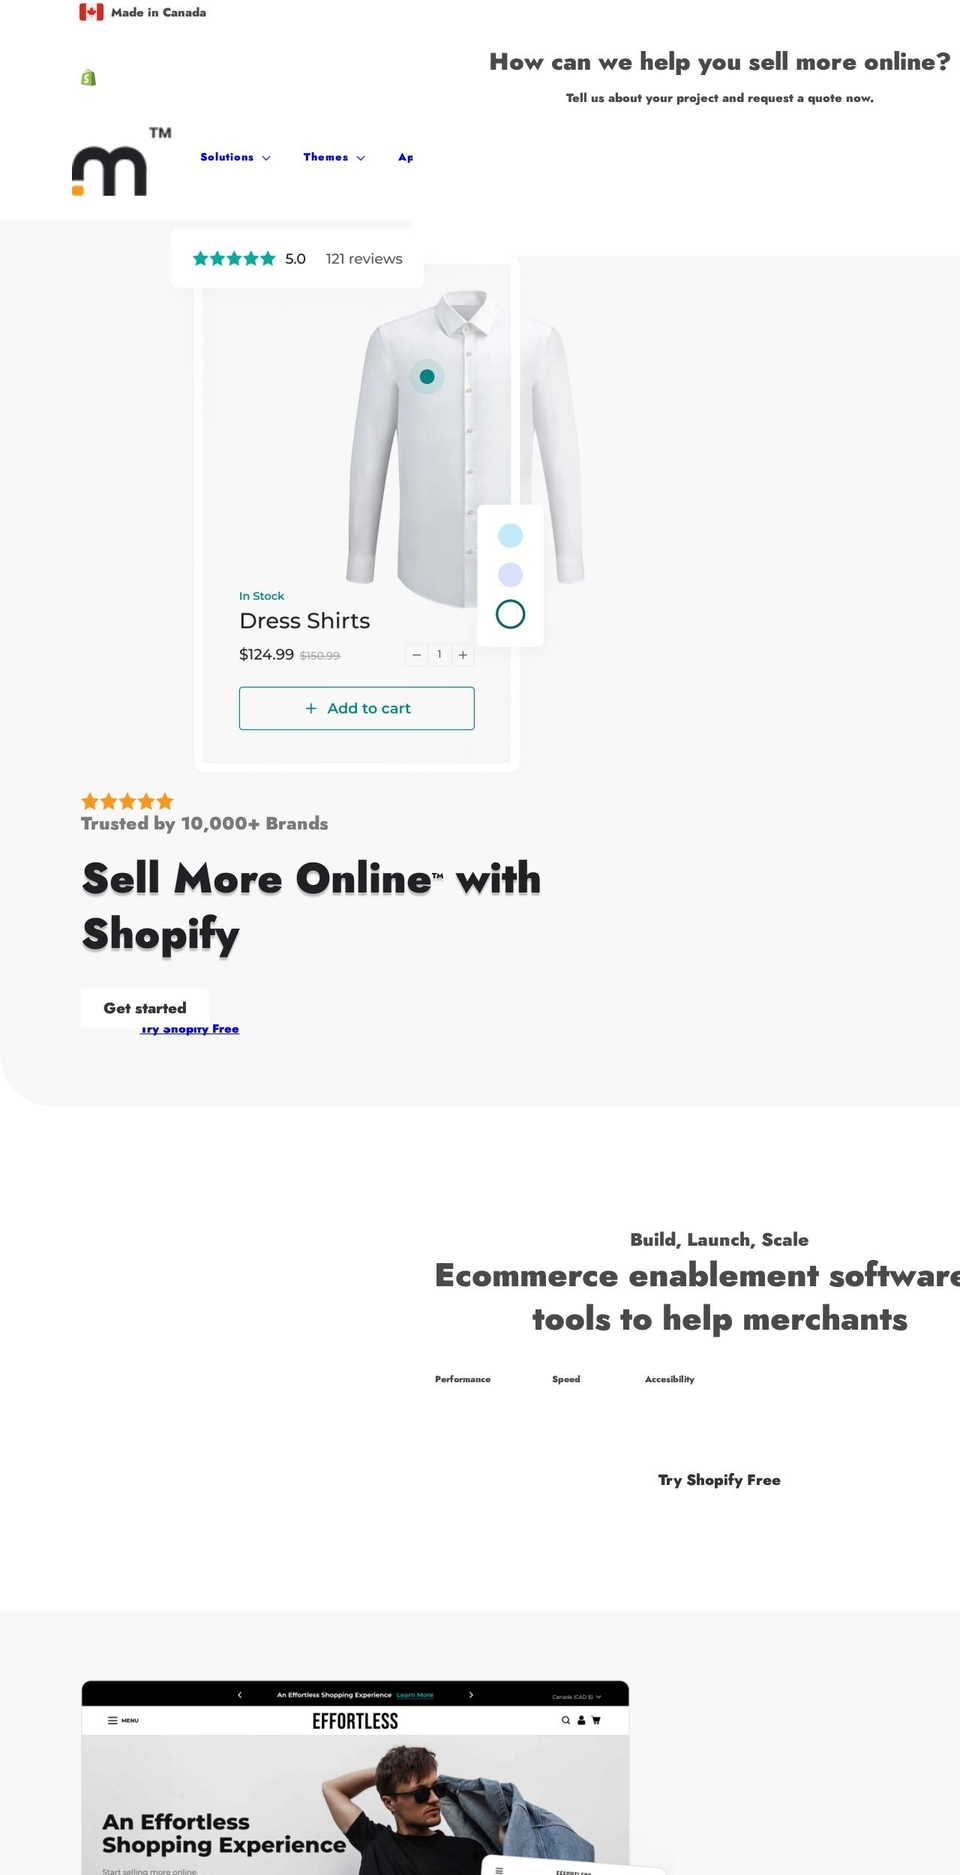 Effortless Shopify theme site example marketplacesolutions.ca